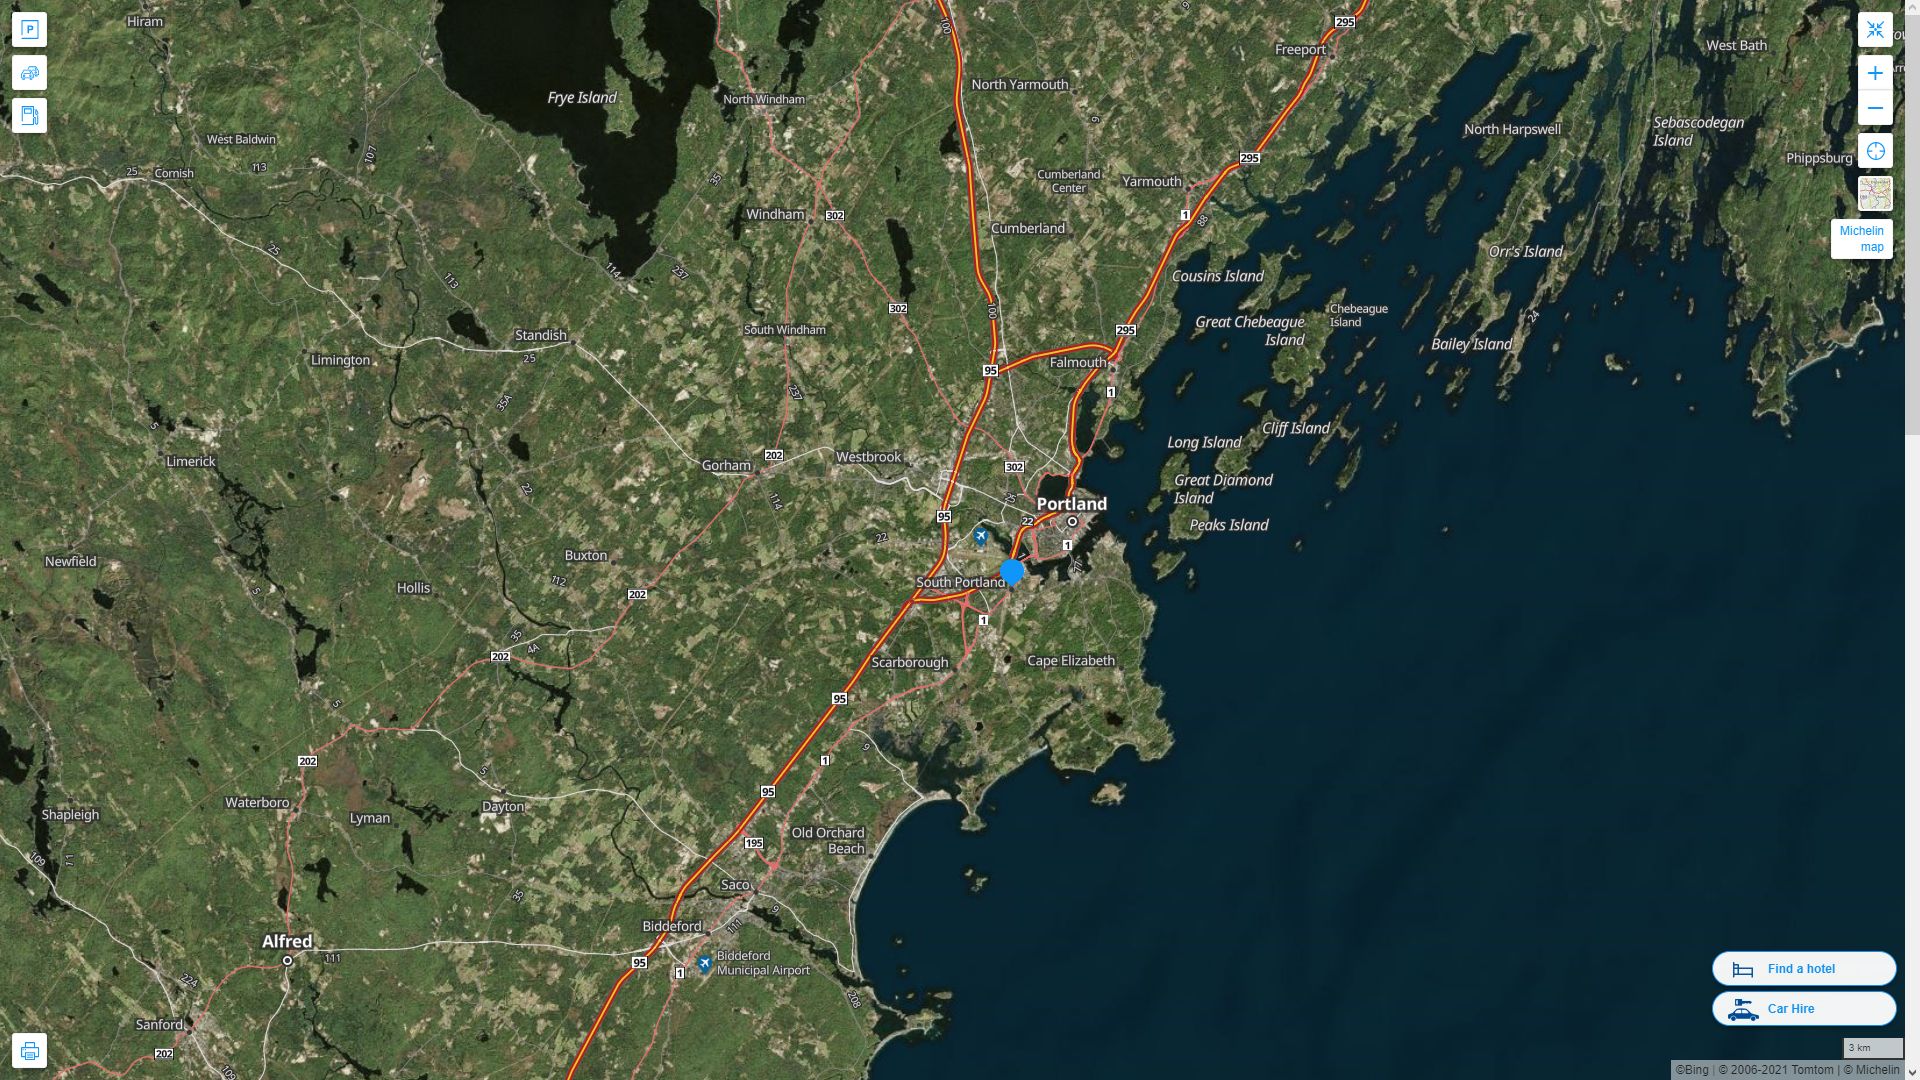 South Portland Maine Highway and Road Map with Satellite View